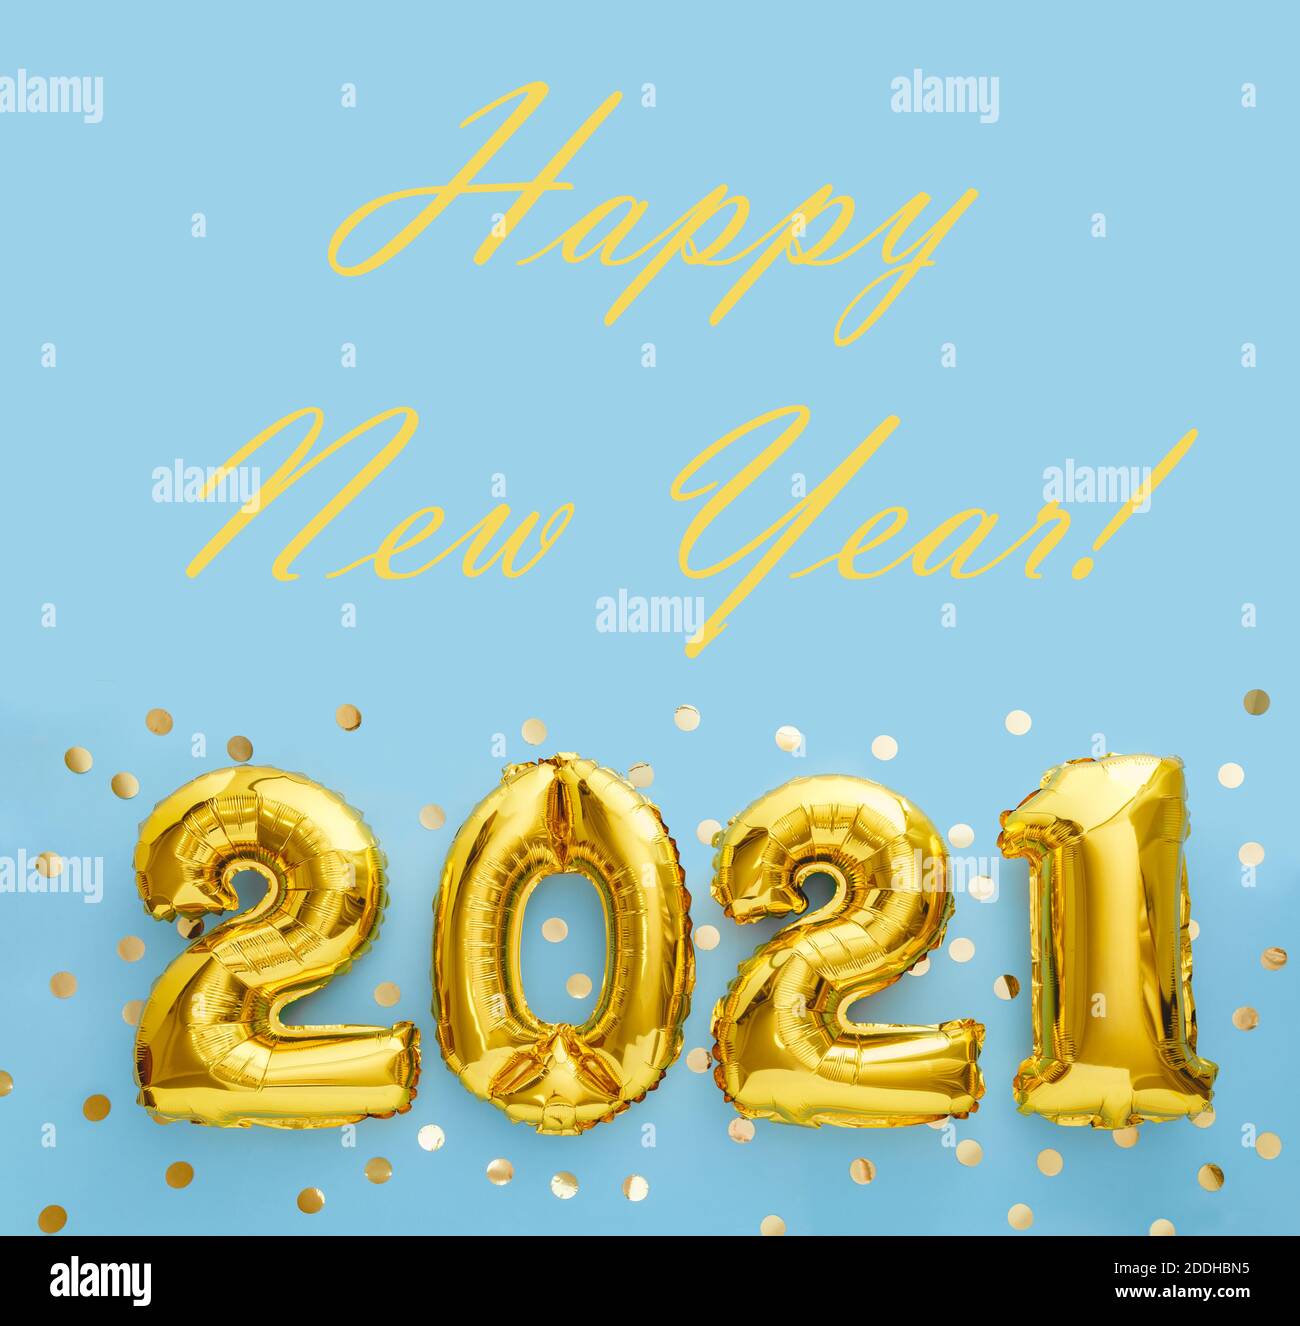 Happy New year text with gold foil balloons 2021 on blue background with confetti. New Year eve invitation 2021. Square flat lay with copy space Stock Photo